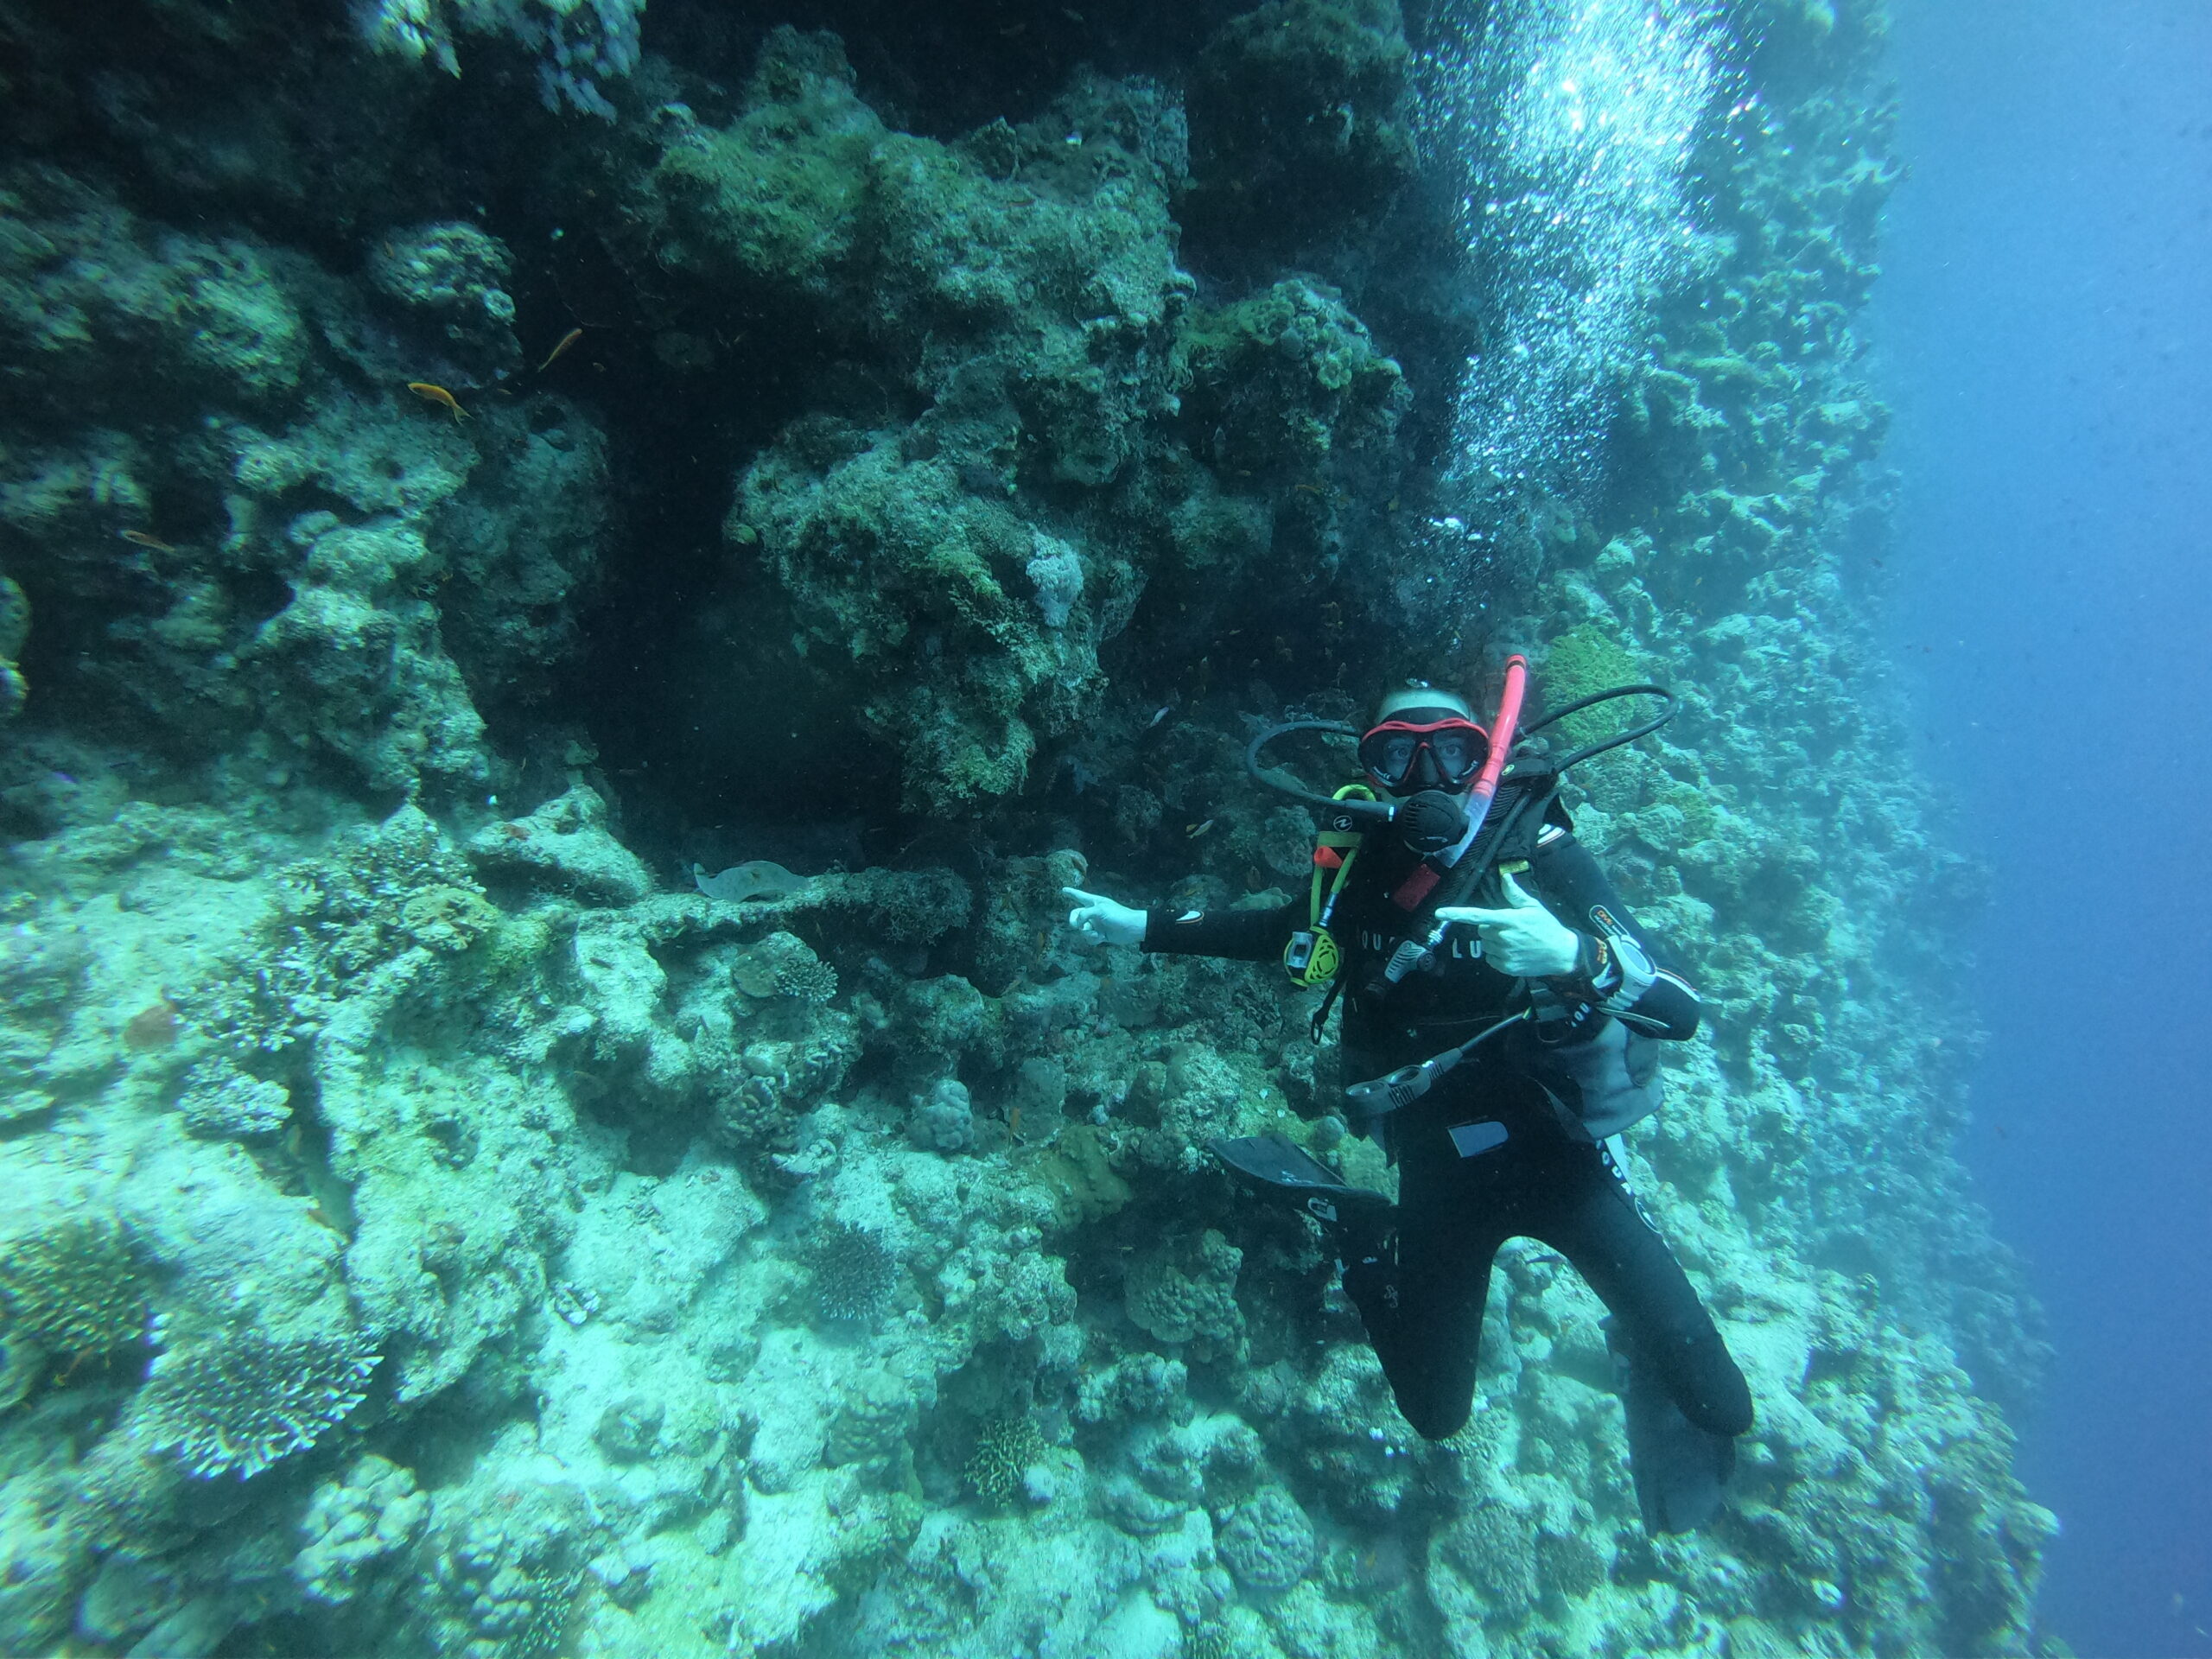 Bailey scuba diving in the Blue Hole in the Red Sea in Sinai, Egypt